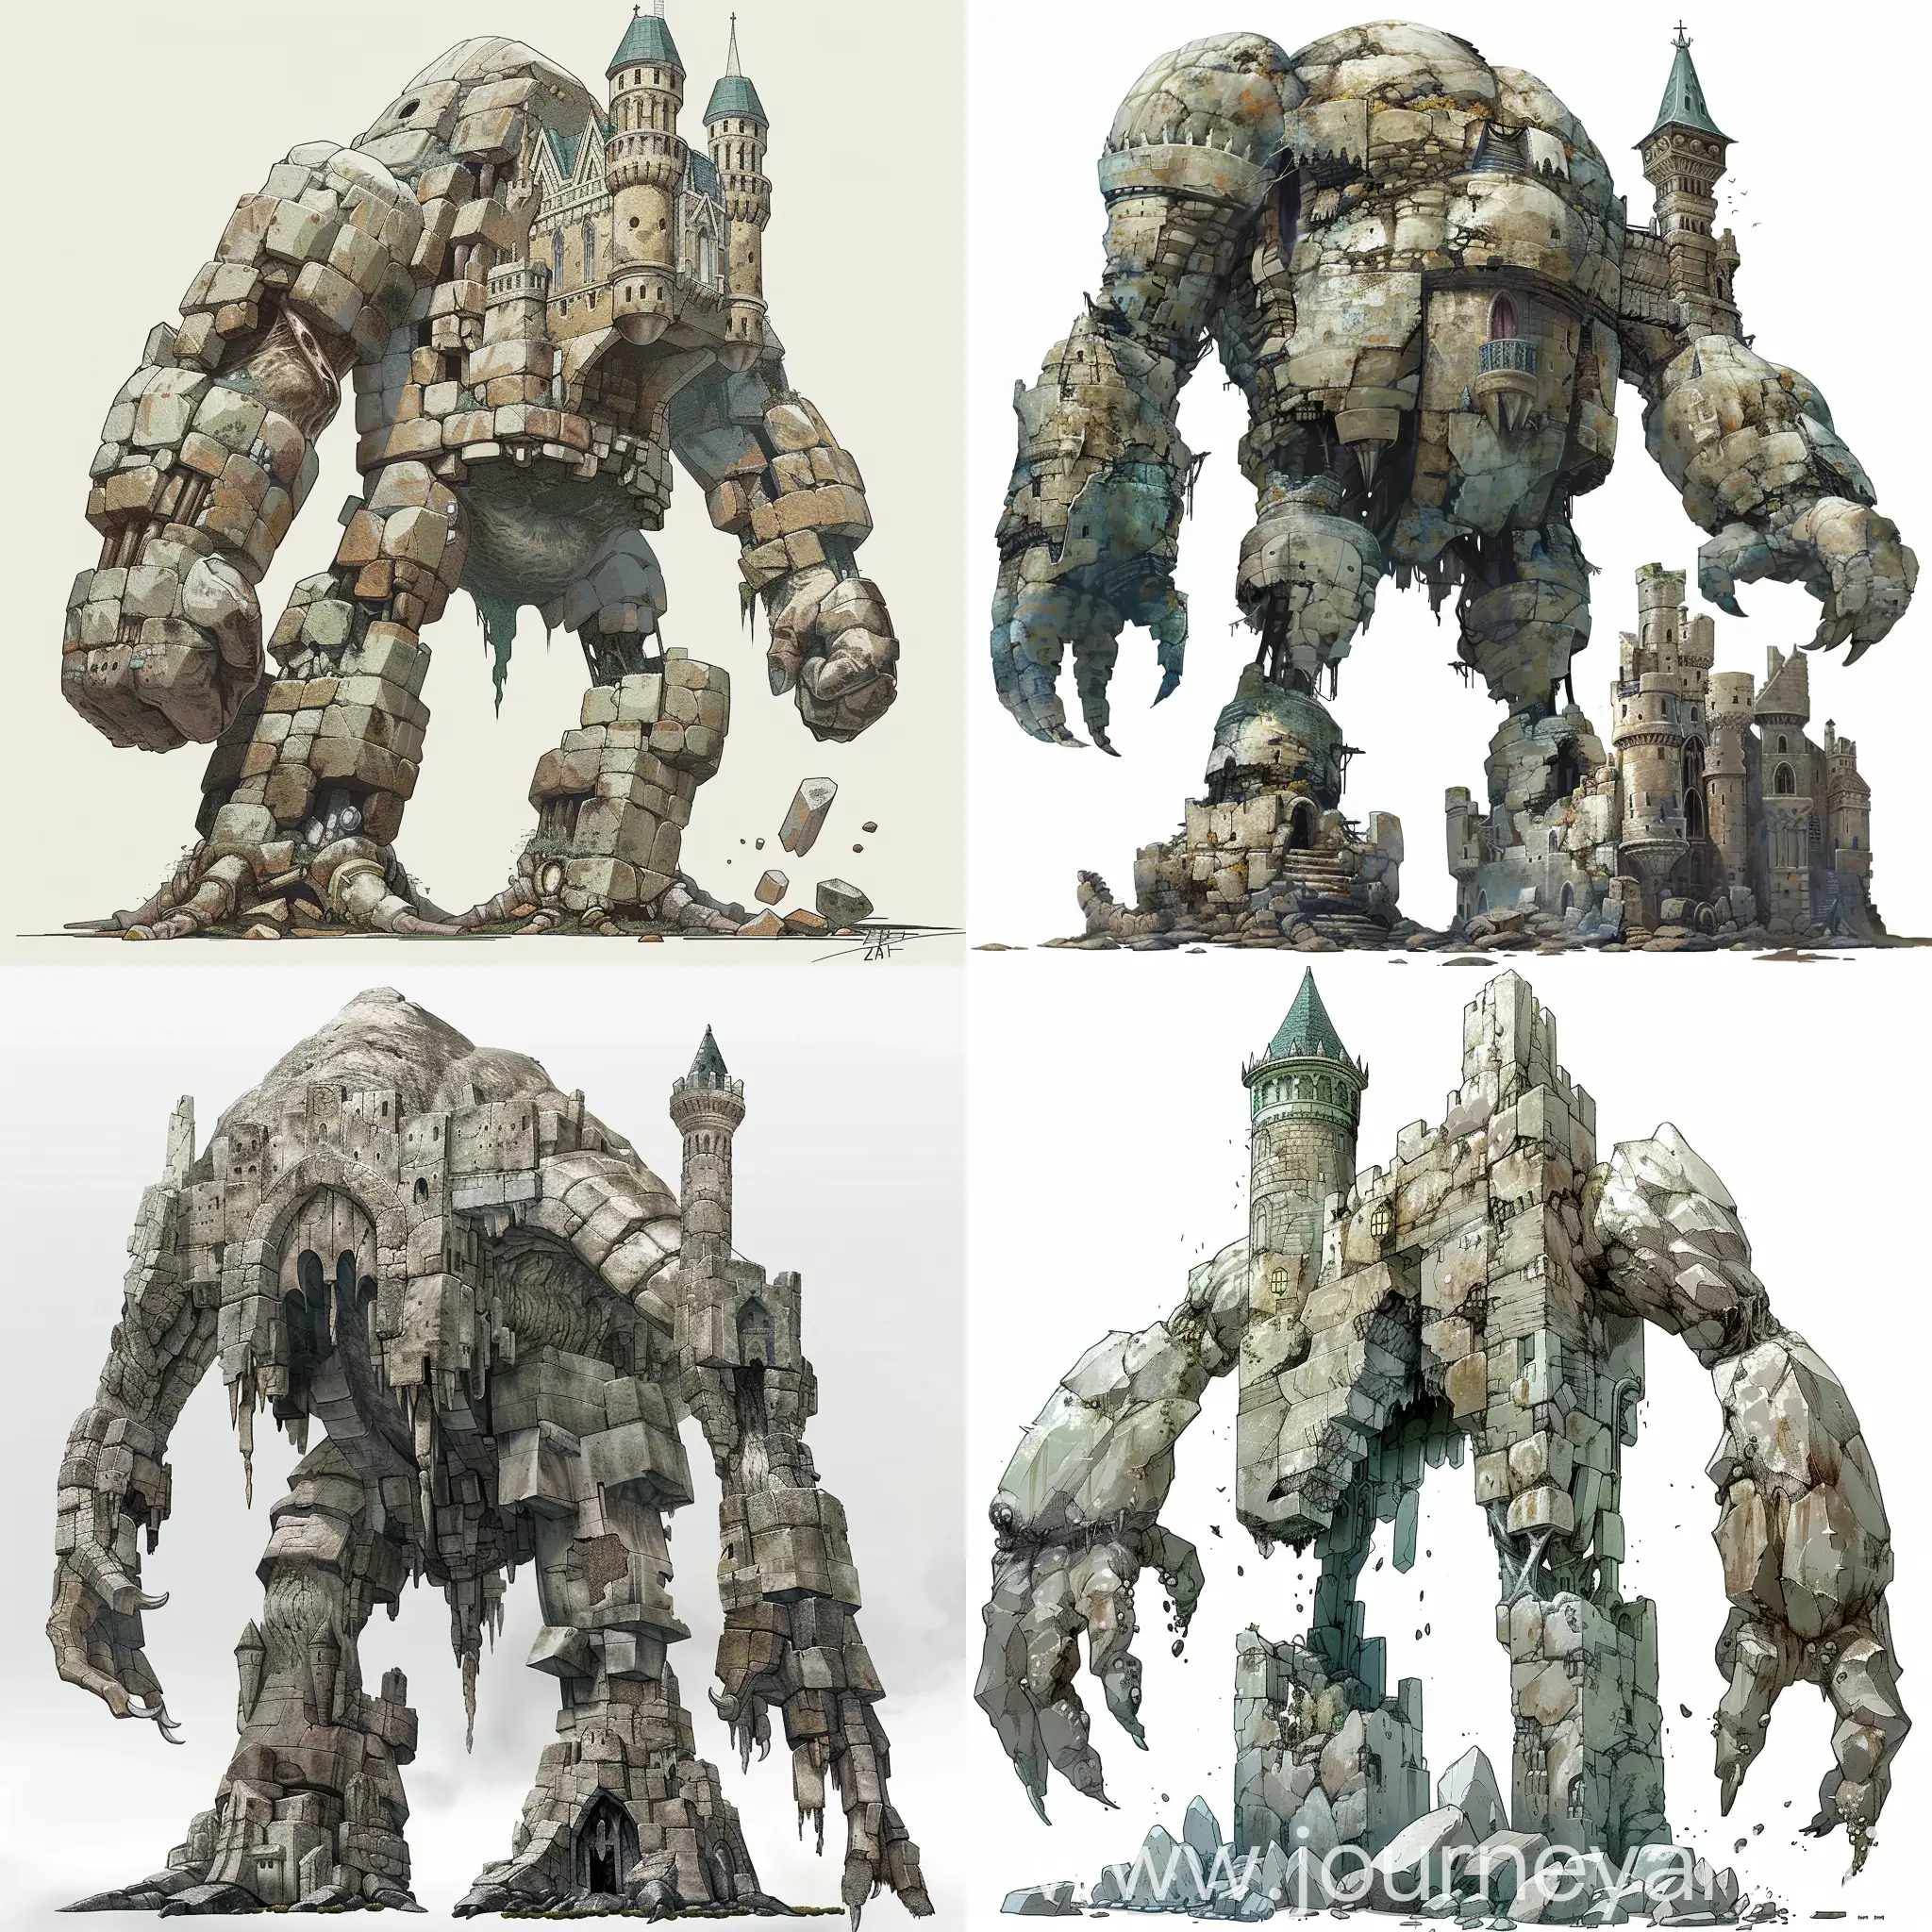 tall giant monster body without legs, body made out of large chunks of stone and large stone walls, large Gothic castle parts rarely spread throughout the body, gothic tower as head, "The legend of Zelda: Tears of The Kingdom" artstyle